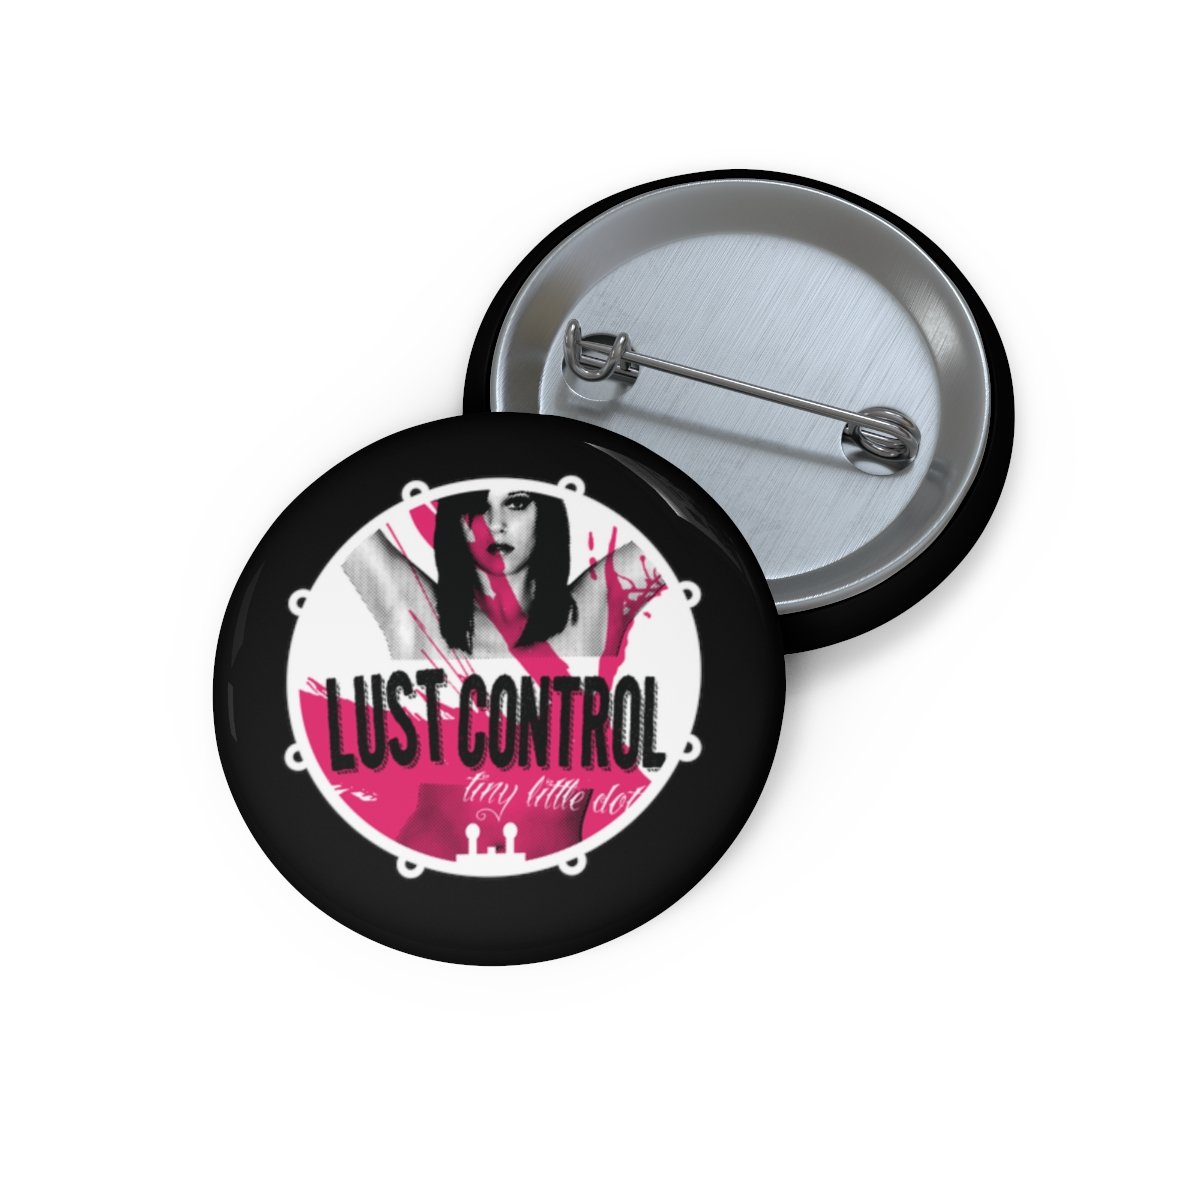 Lust Control – Tiny Little Dots Kickdrum Pin Buttons